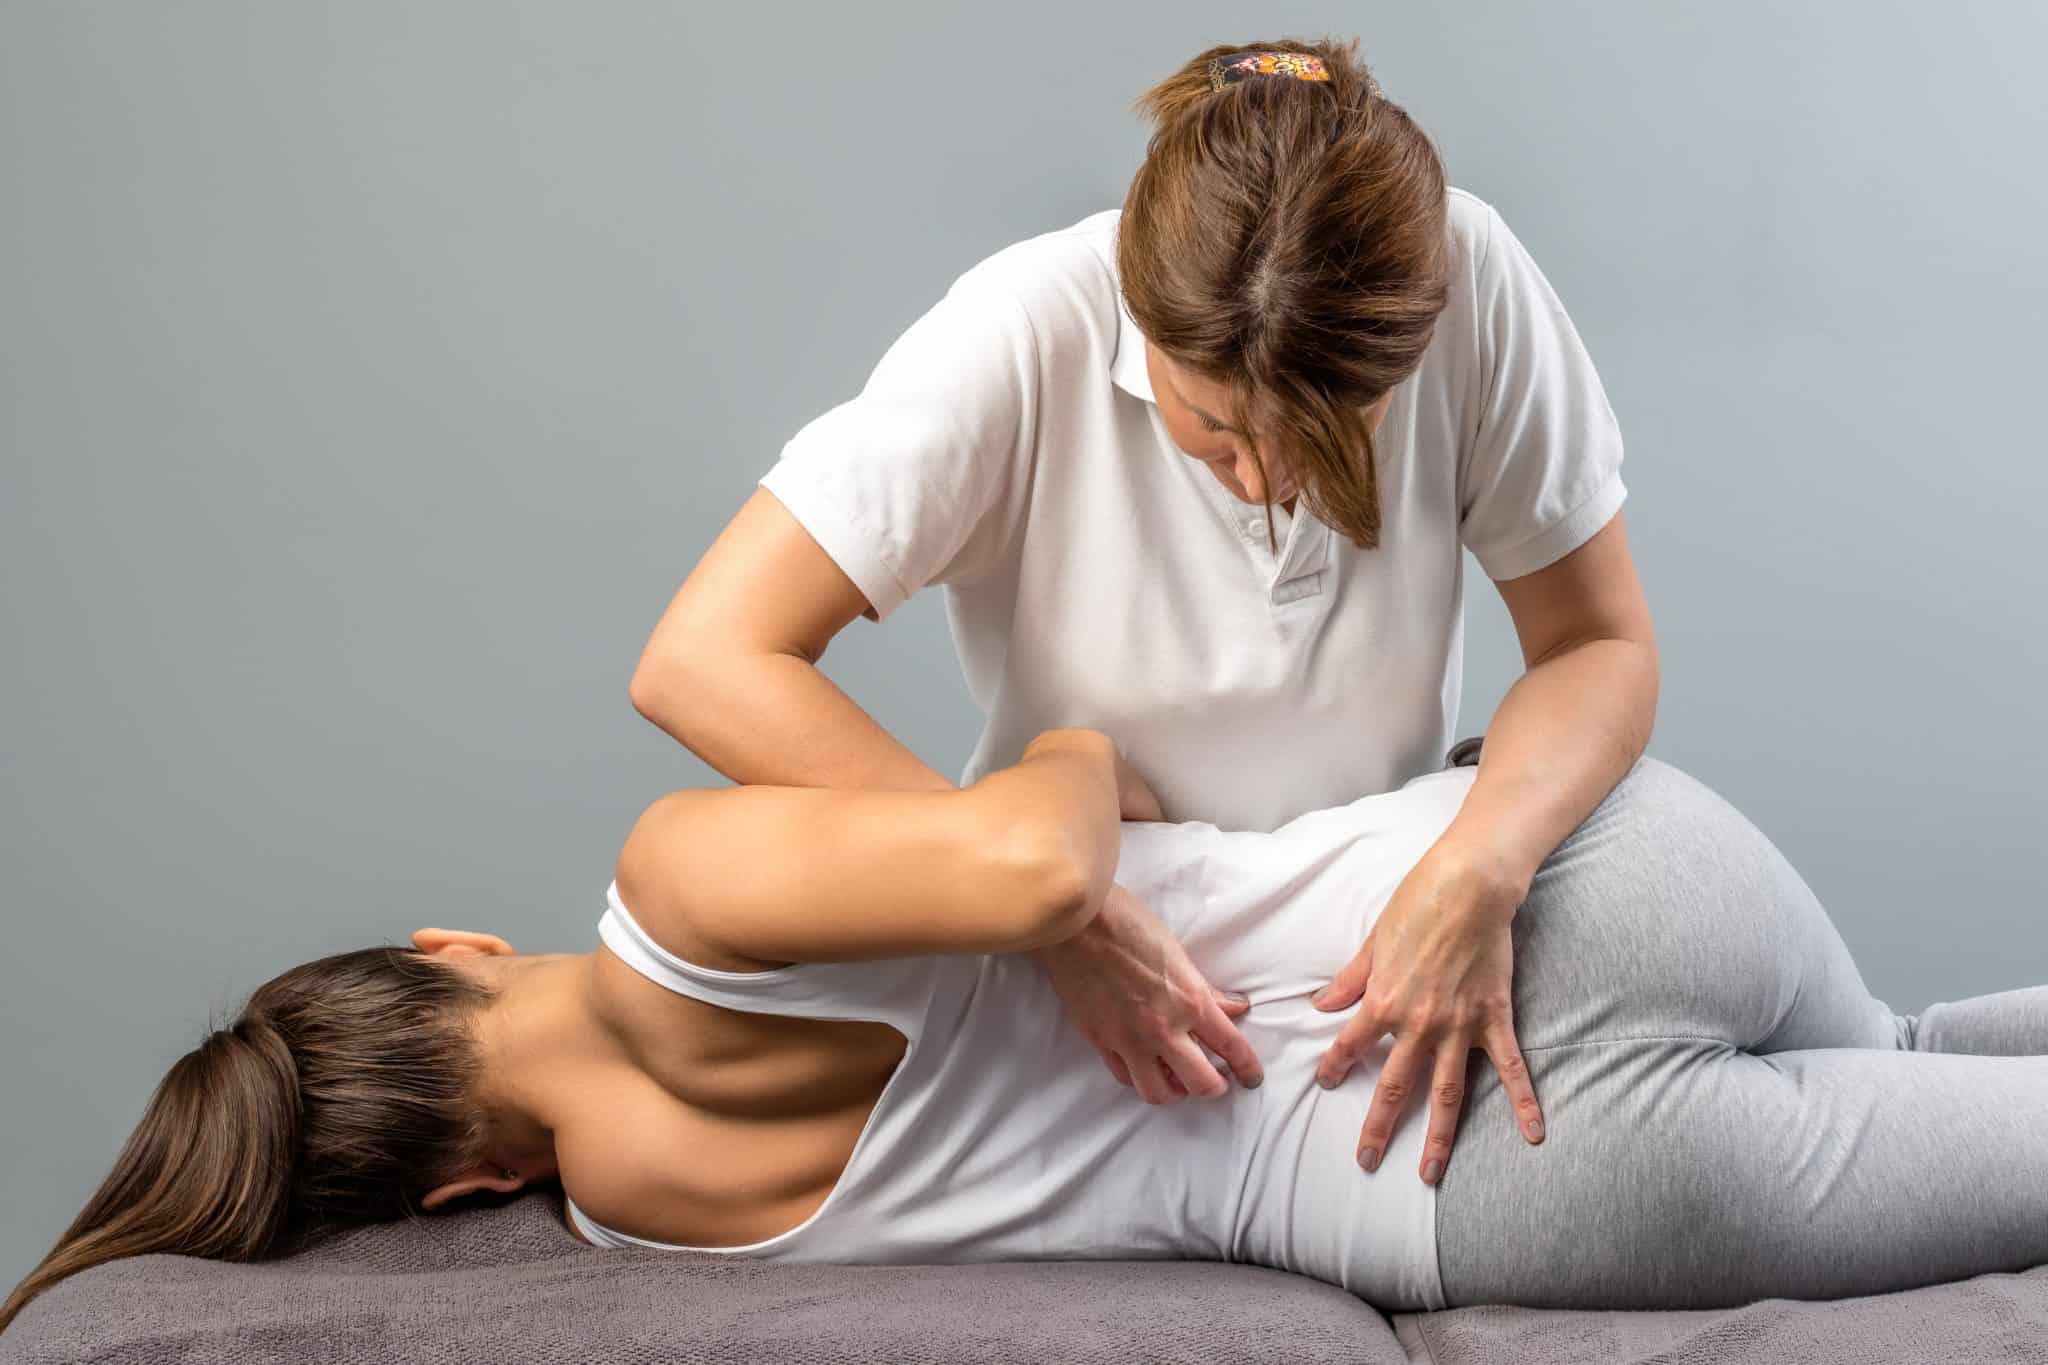 Chiropractor can Boost your Libido - Women Fitness